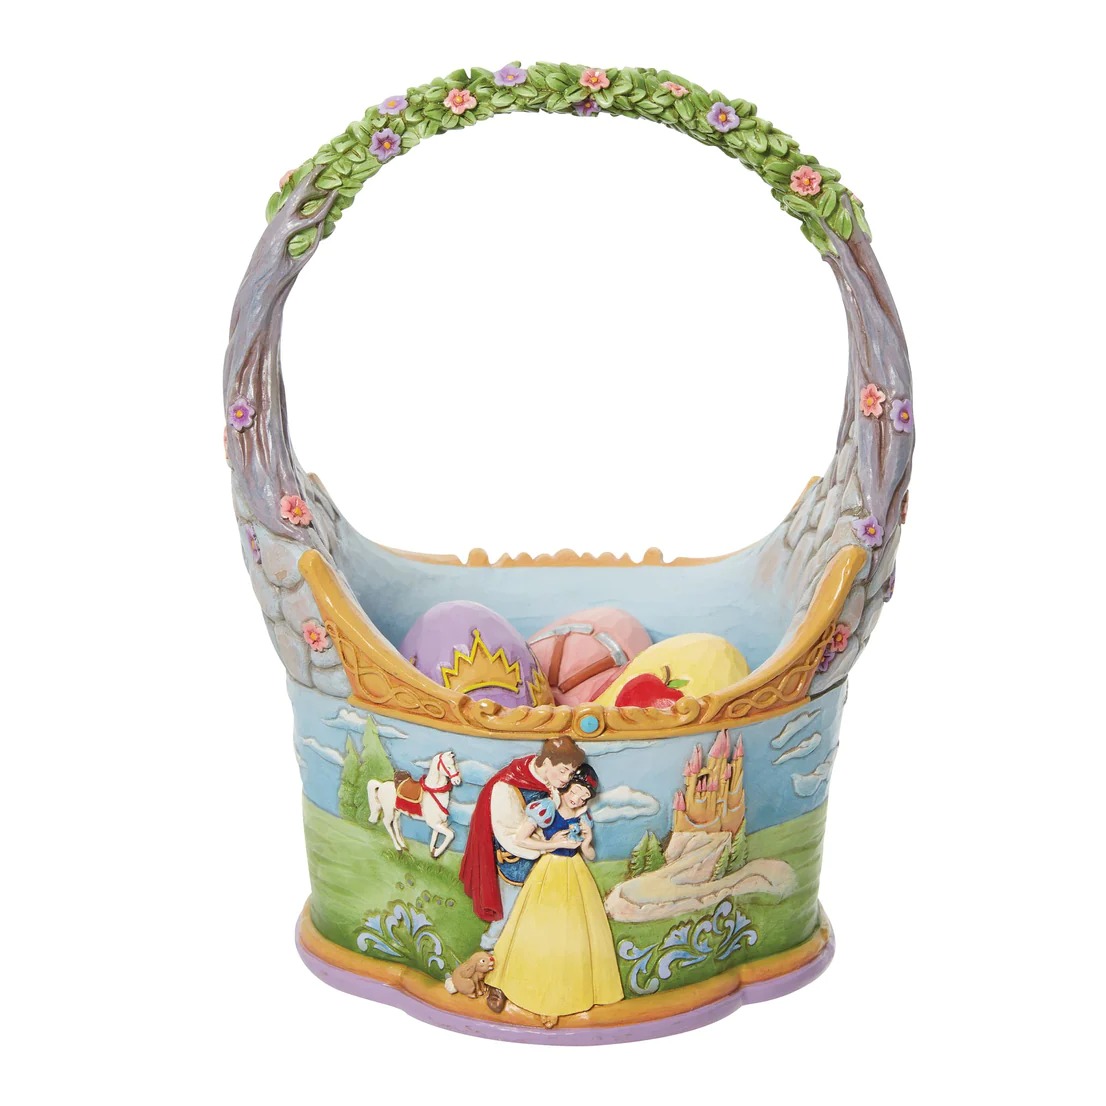 Snow White Basket and Eggs